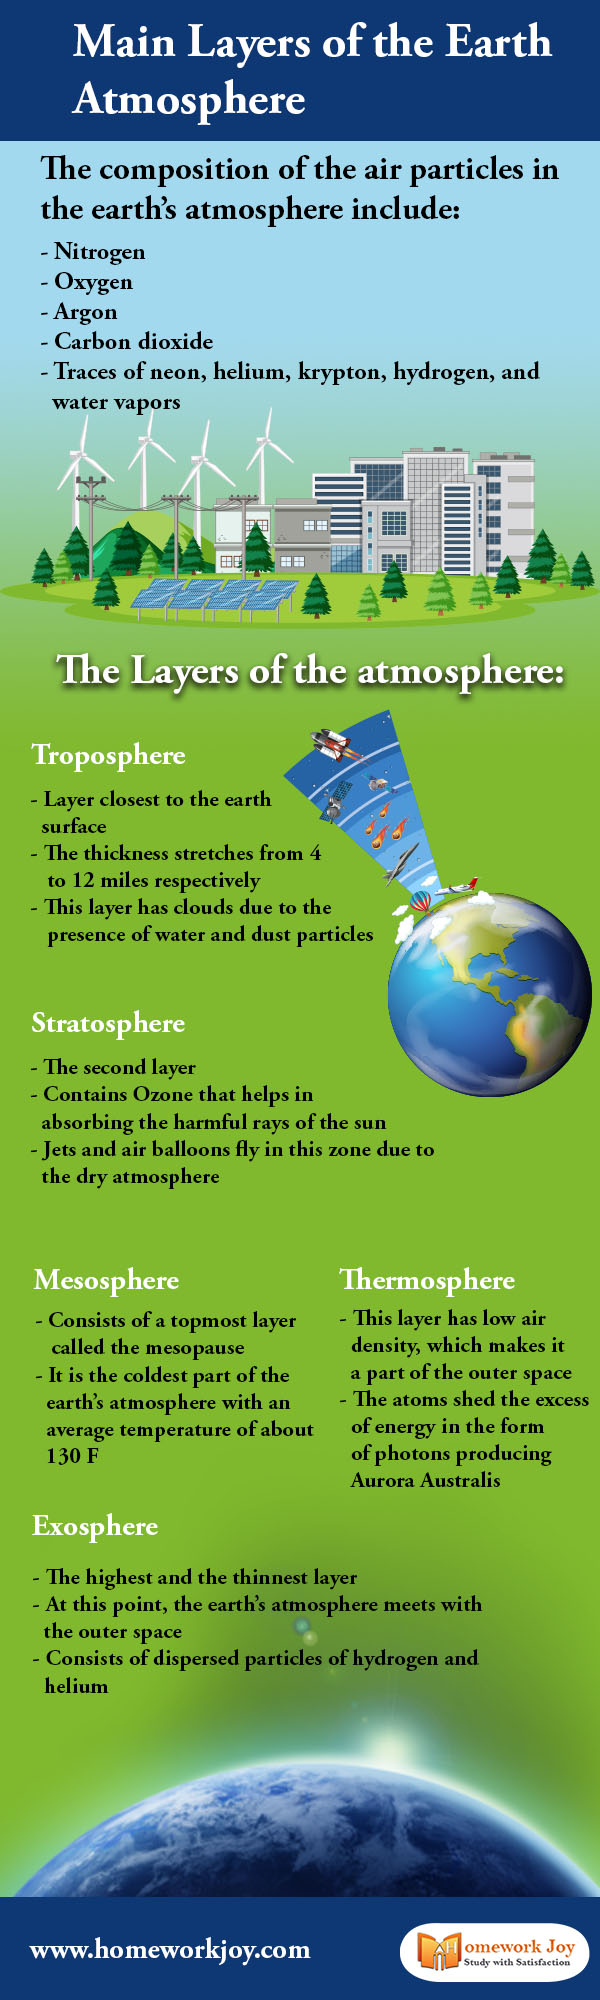 main layers of the earths atmosphere